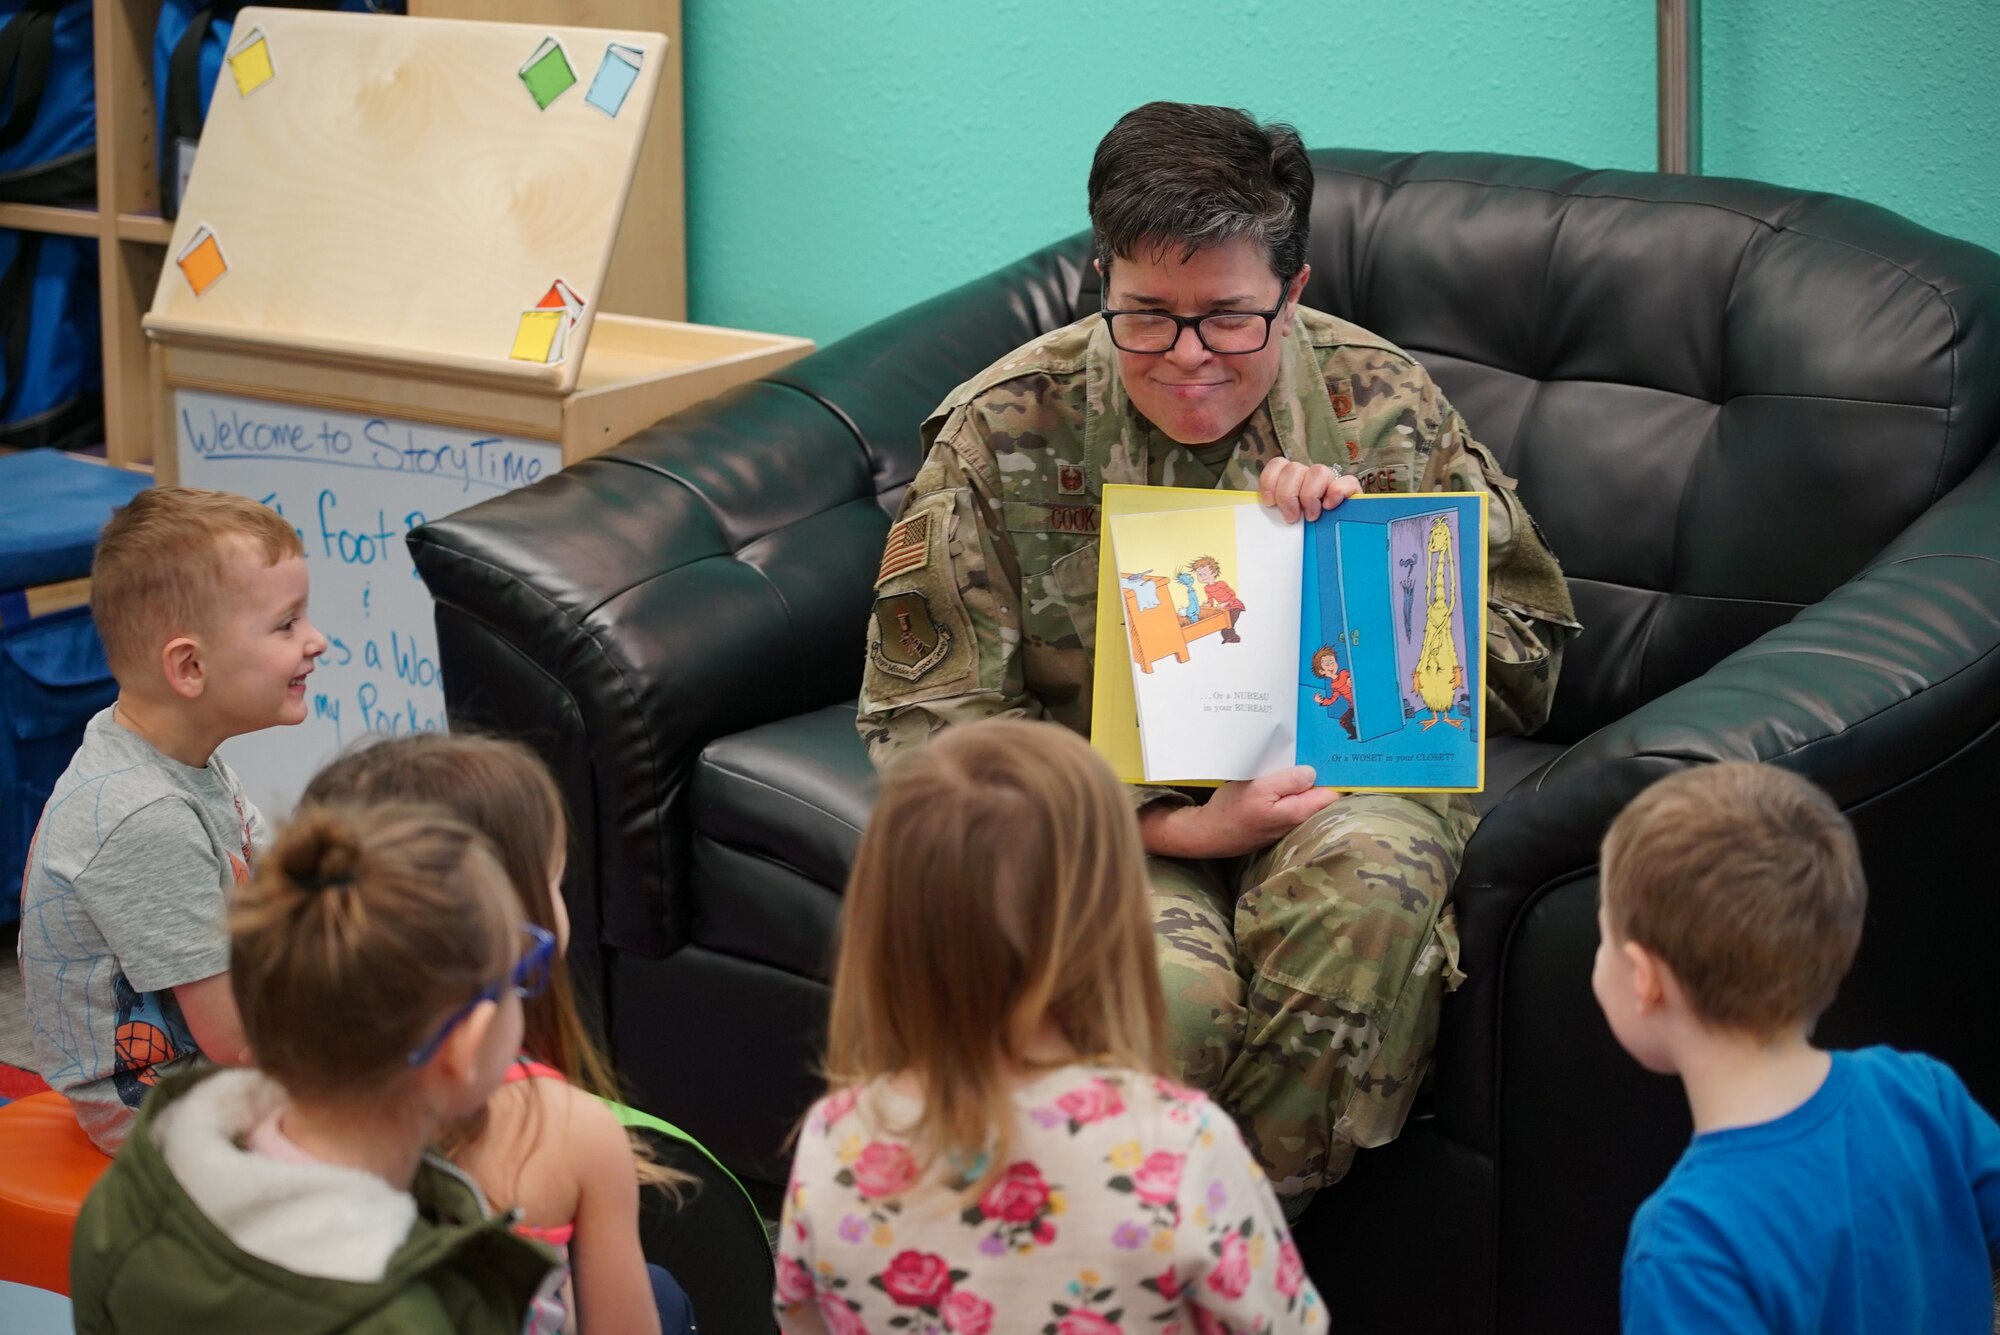 Col. Heather Cook, 319th Mission Support Group commander, reads a Dr. Suess book to a group of children March 4, 2020, in the library on Grand Forks Air Force Base, N.D. The story time took place following the library’s grand re-opening ceremony, which celebrated its renovations to include new carpet, shelving, paint and signage. (U.S. Air Force photo by Senior Airman Elora J. McCutcheon)